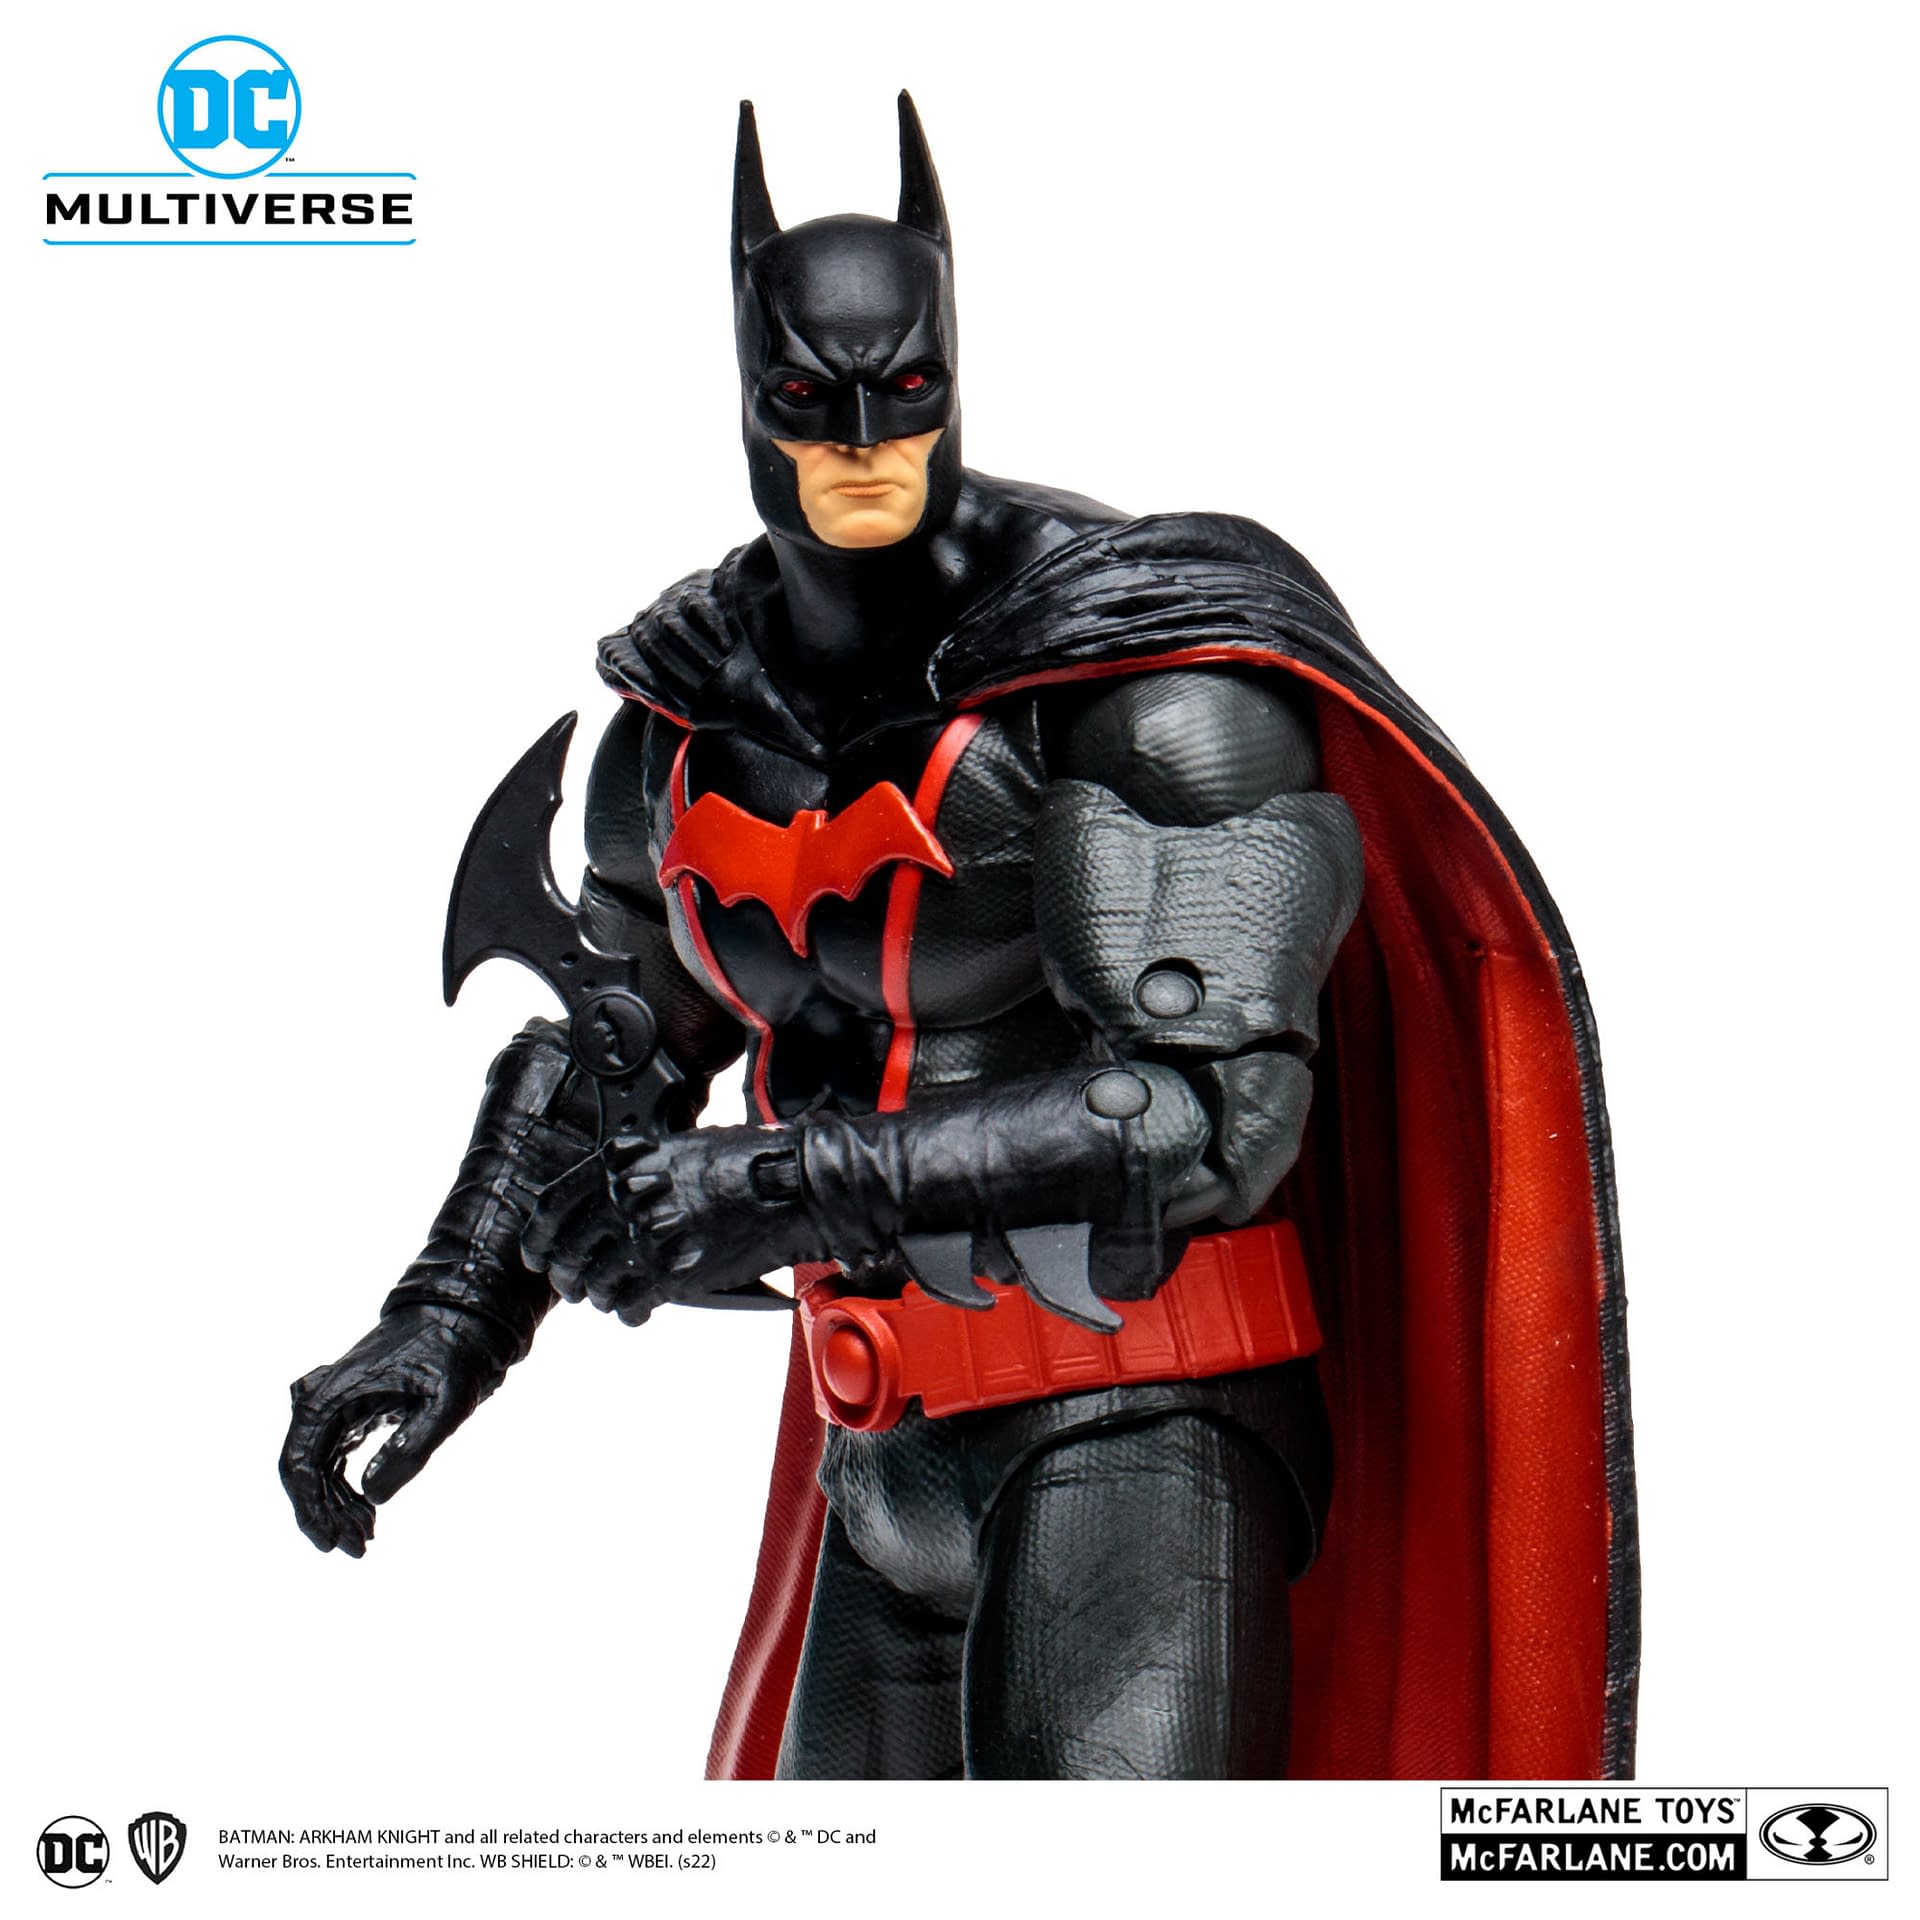 Earth-2 Batman Enters the DC Multiverse with McFarlane Toys